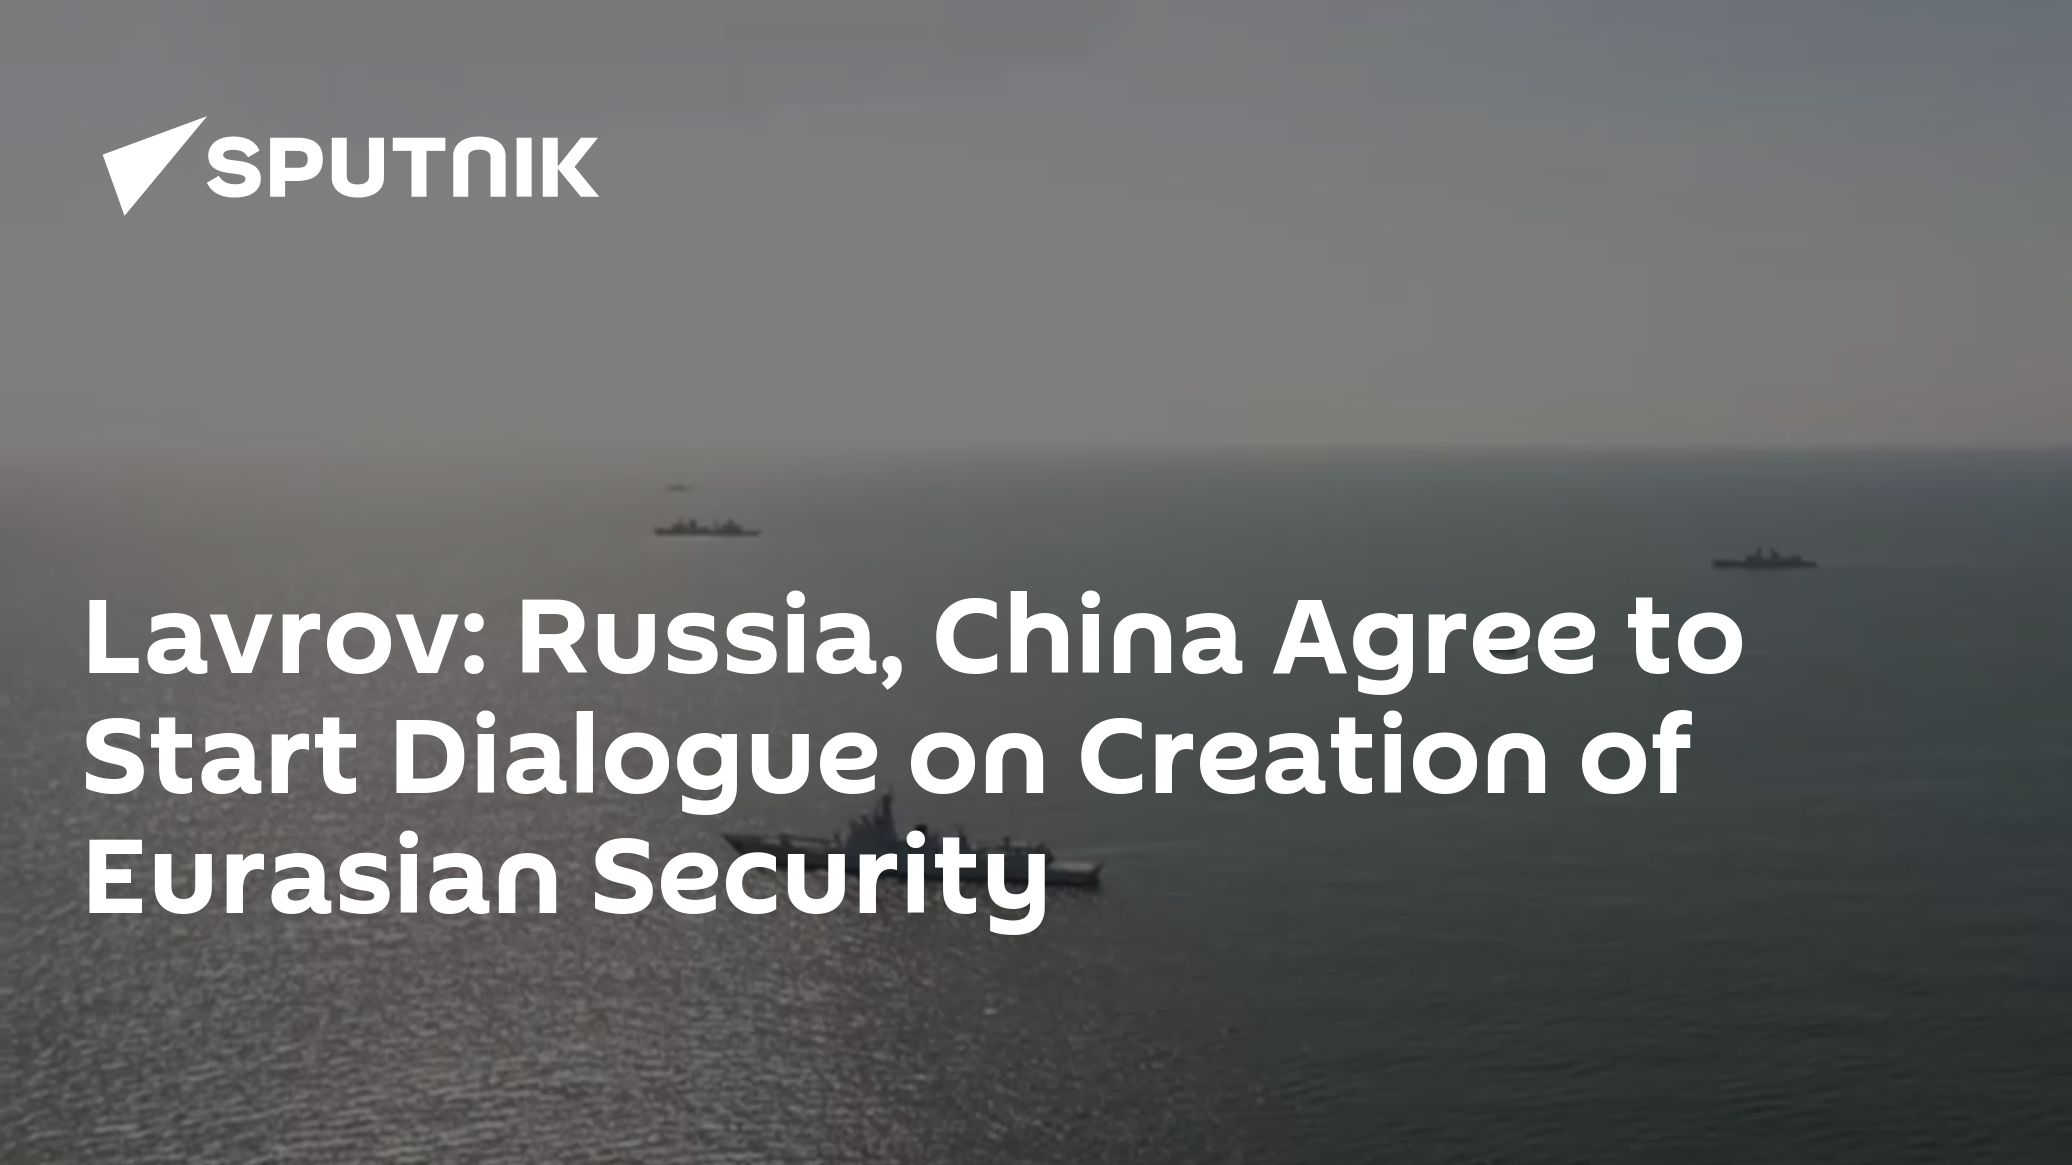 Lavrov: Russia, China Agree to Start Dialogue on Creation of Eurasian Security